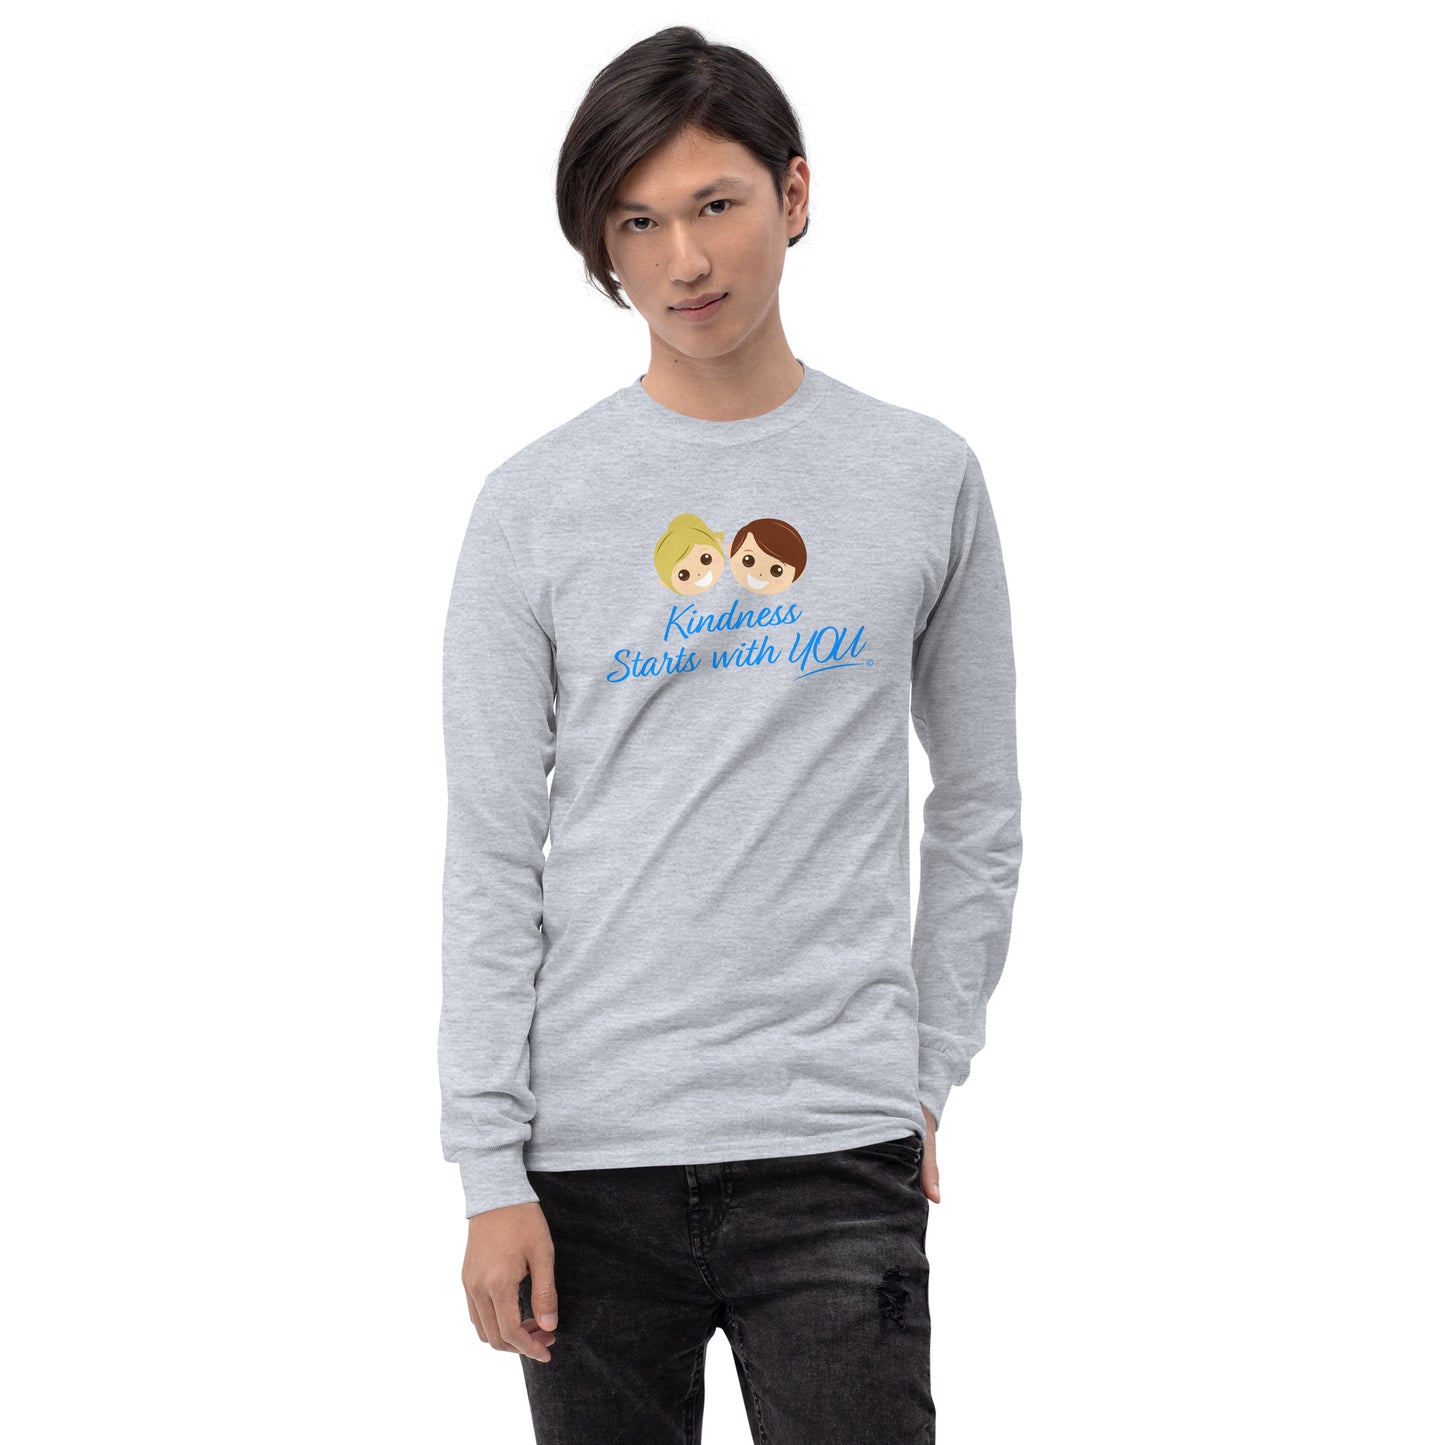 Kindness Starts with You Unisex Long-Sleeve Shirts